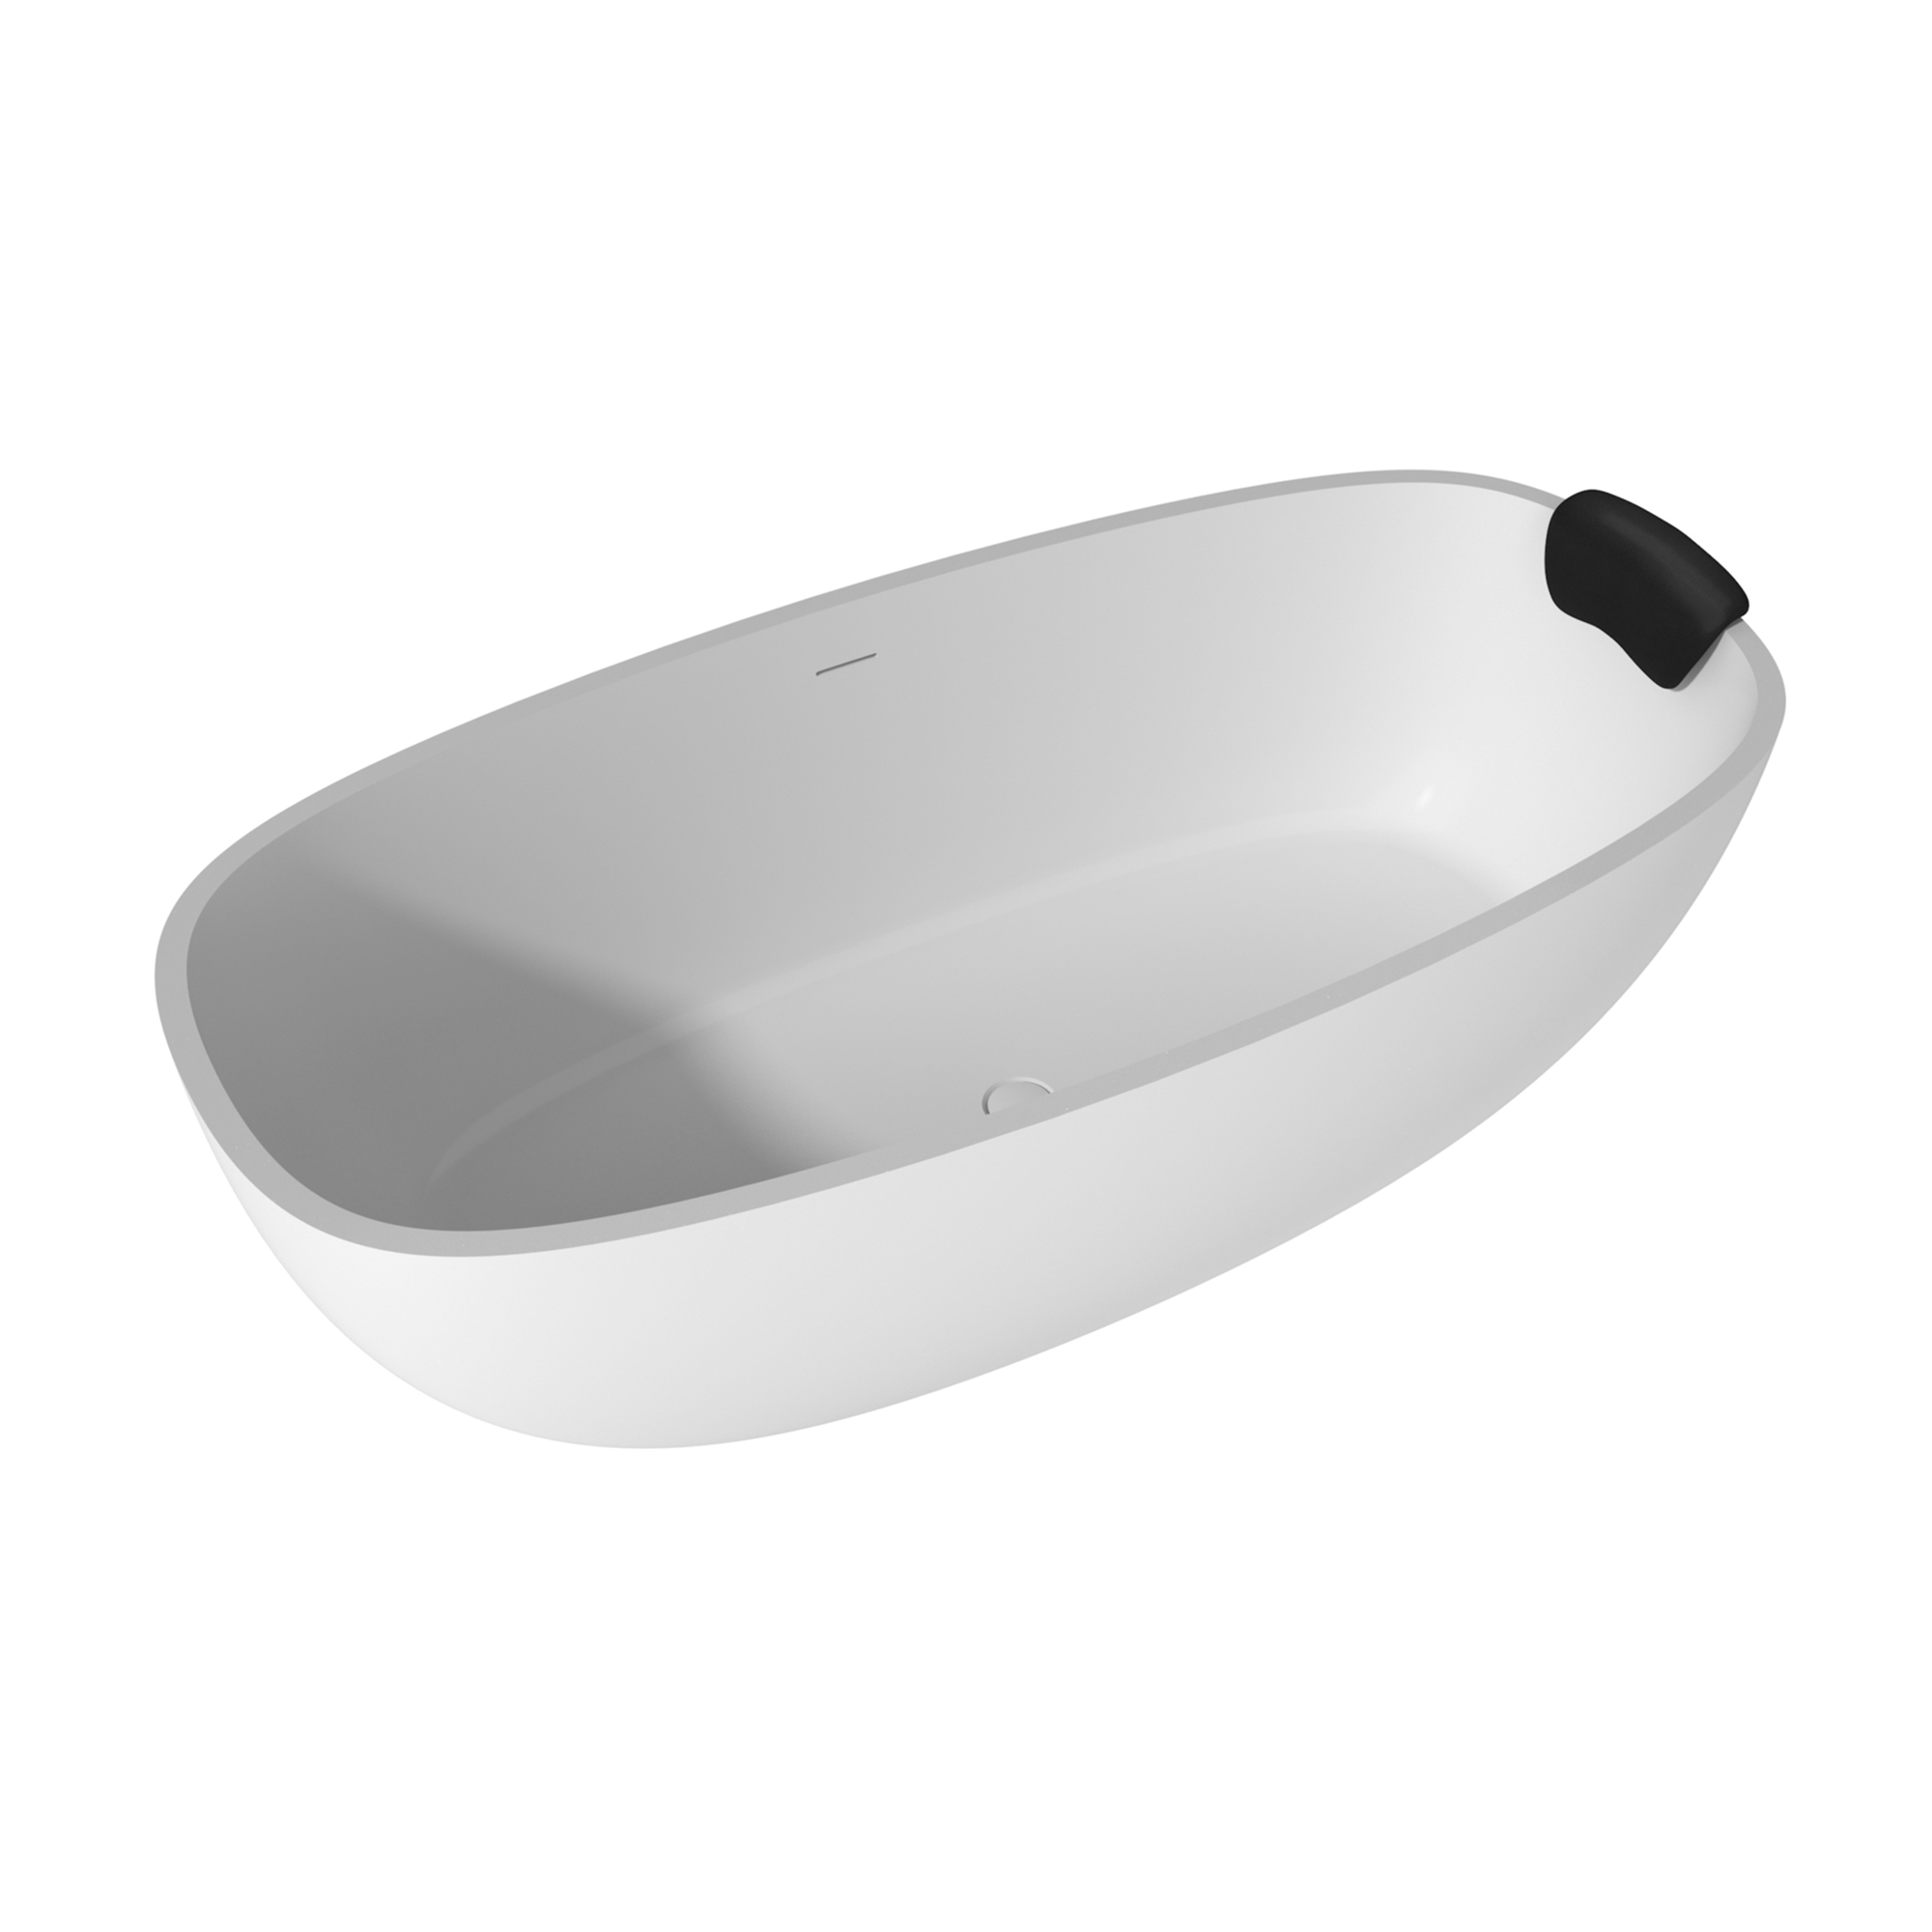 71" Matte White Stone Resin Bathtubs, Adult Freestanding Oval Soaking Tub with Cushions for Luxury Bath Experience